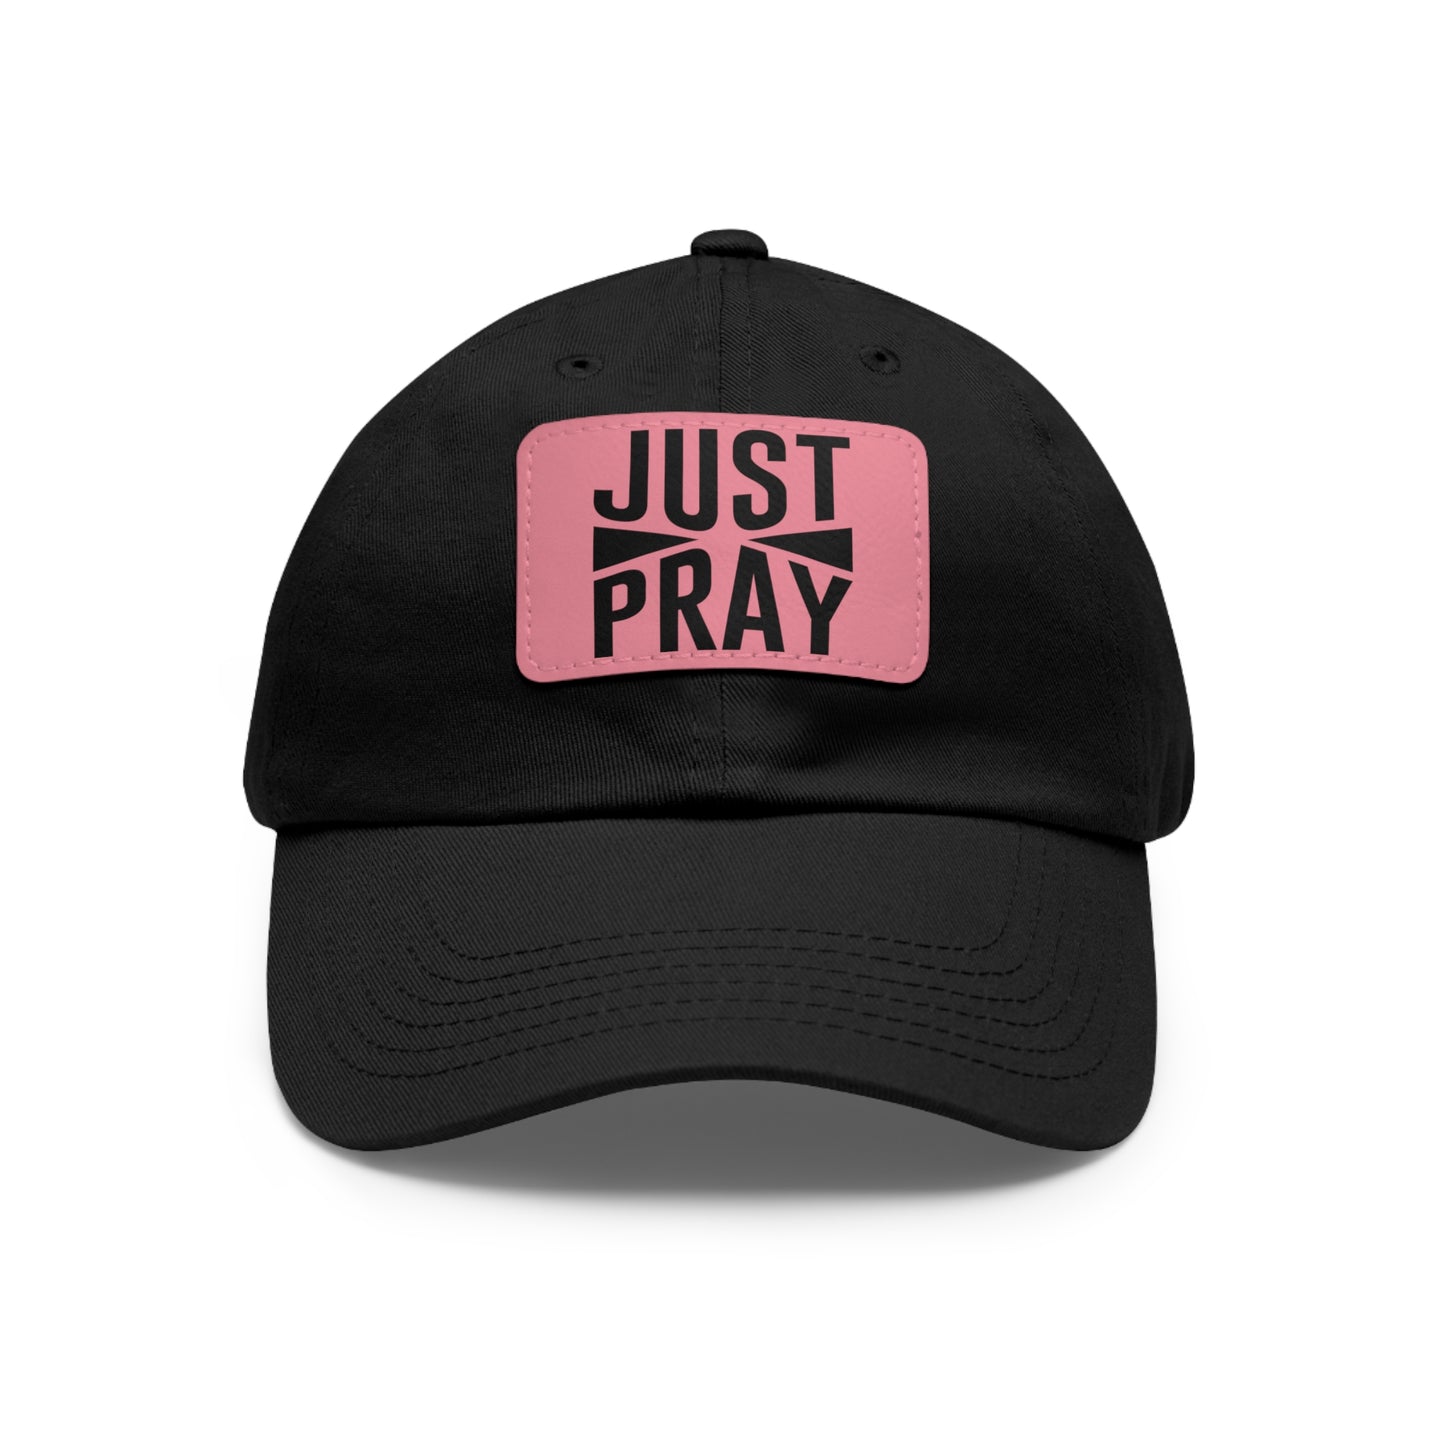 JUST PRAY - LEATHER PATCH CAP